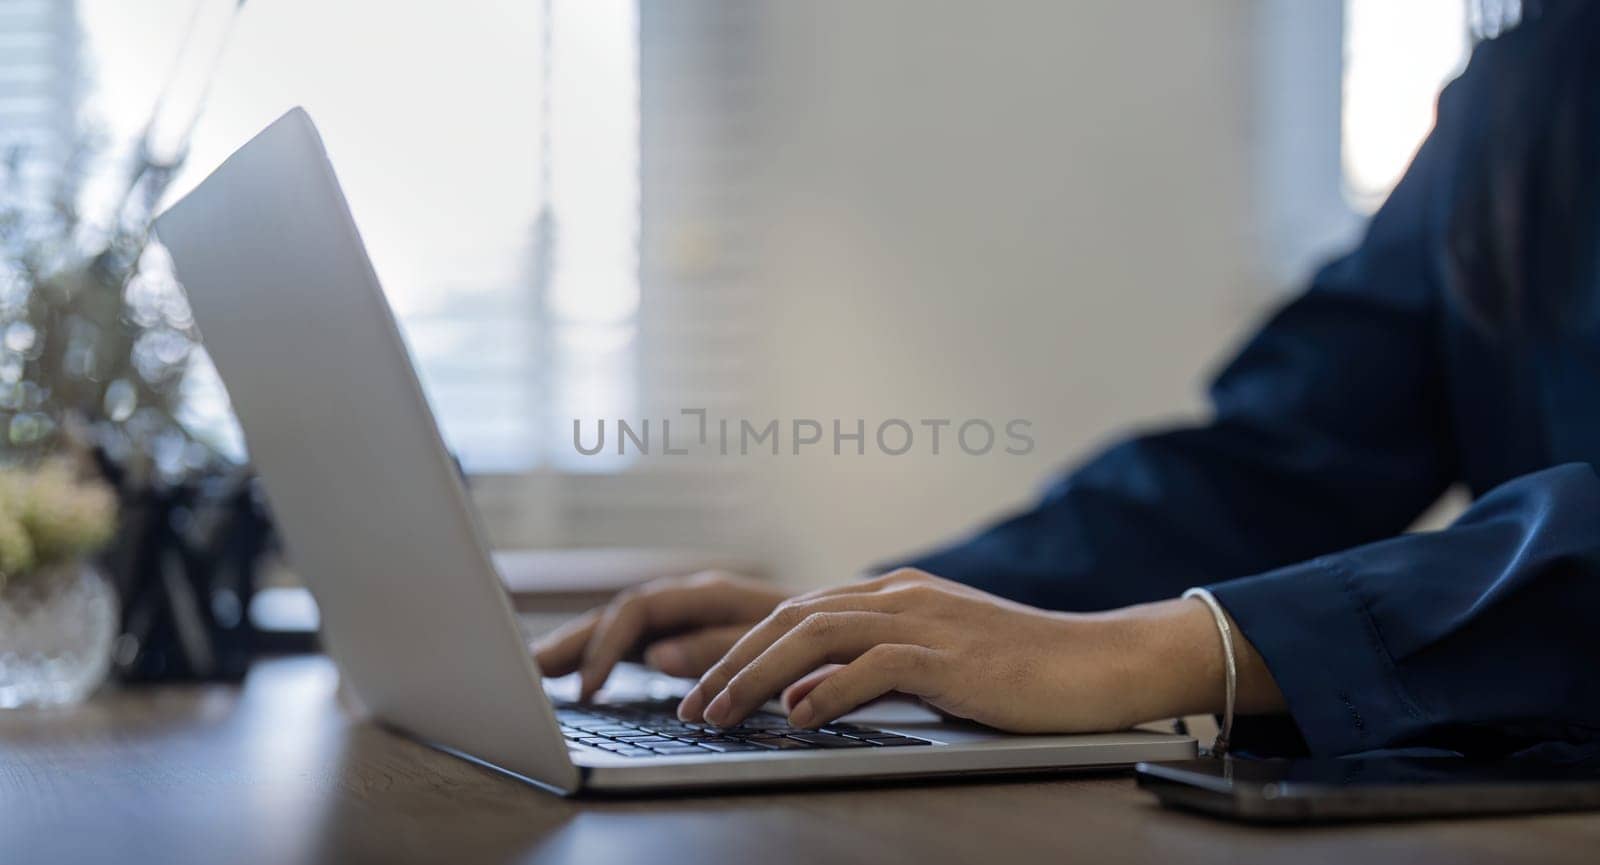 Professional businesswoman working at her home via laptop, young female manager using computer laptop while sitting on desk, work process concept by nateemee